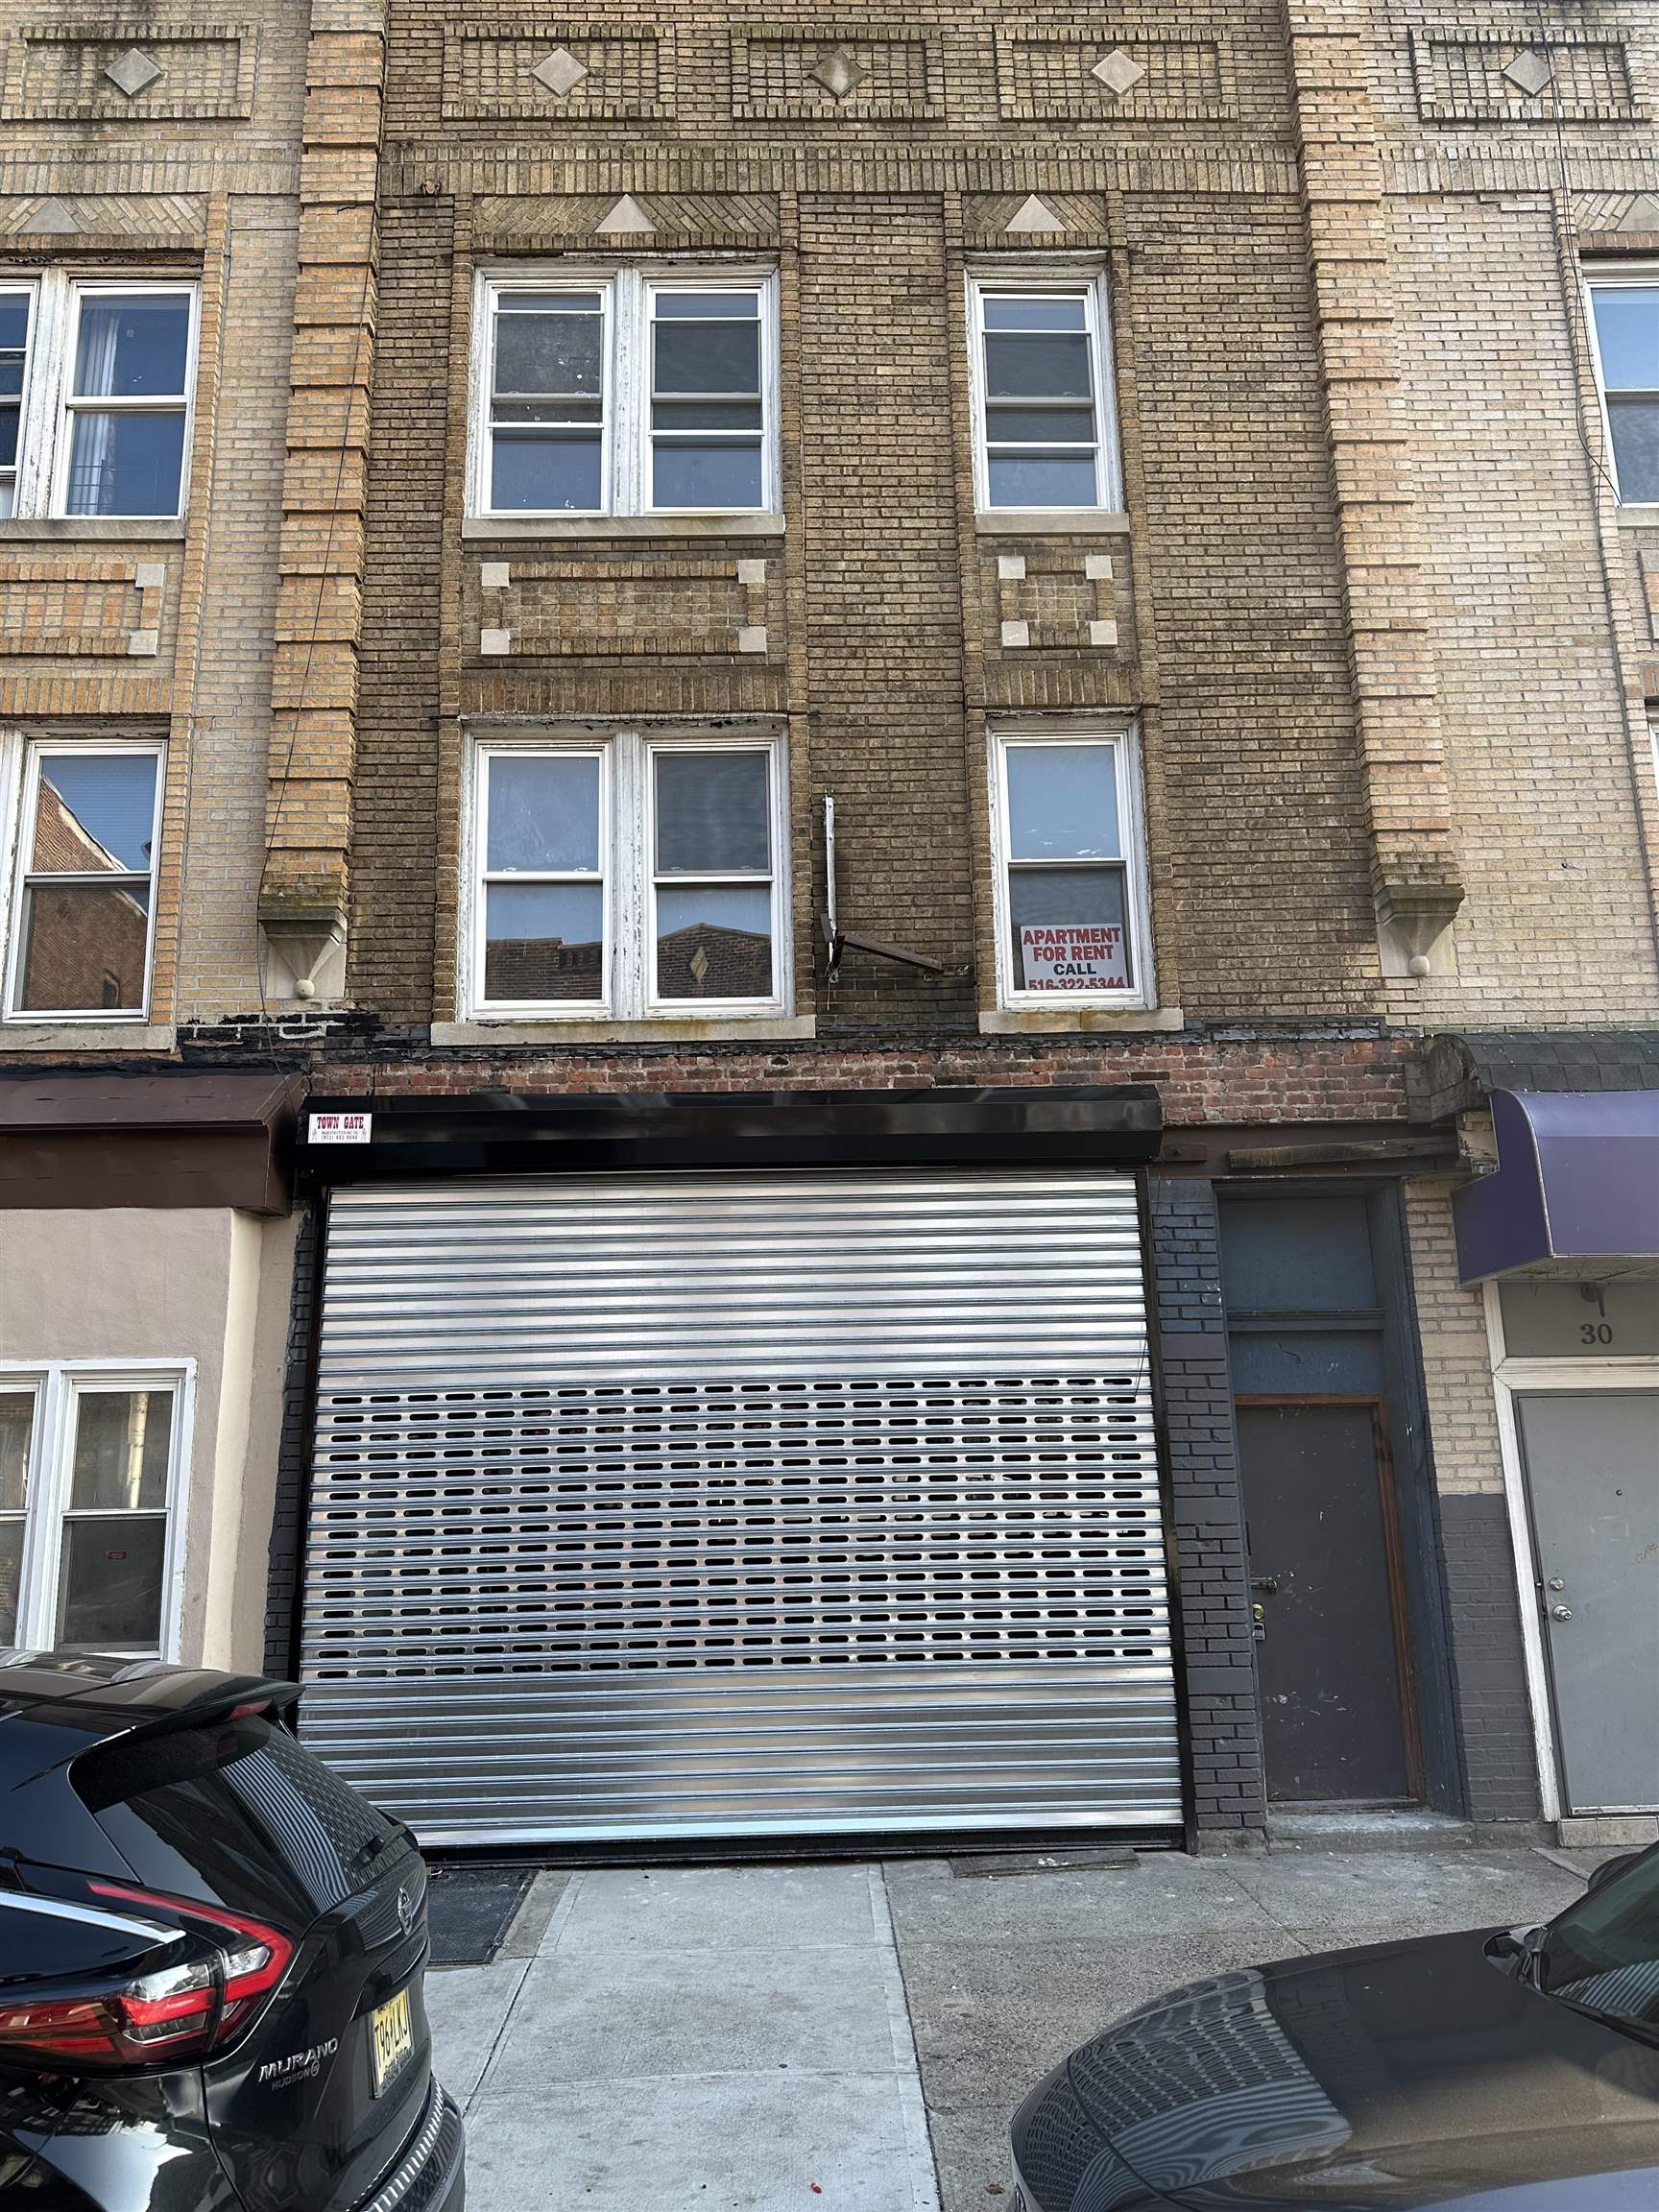 # 240003398 - For Rent in JERSEY CITY - Greenville NJ